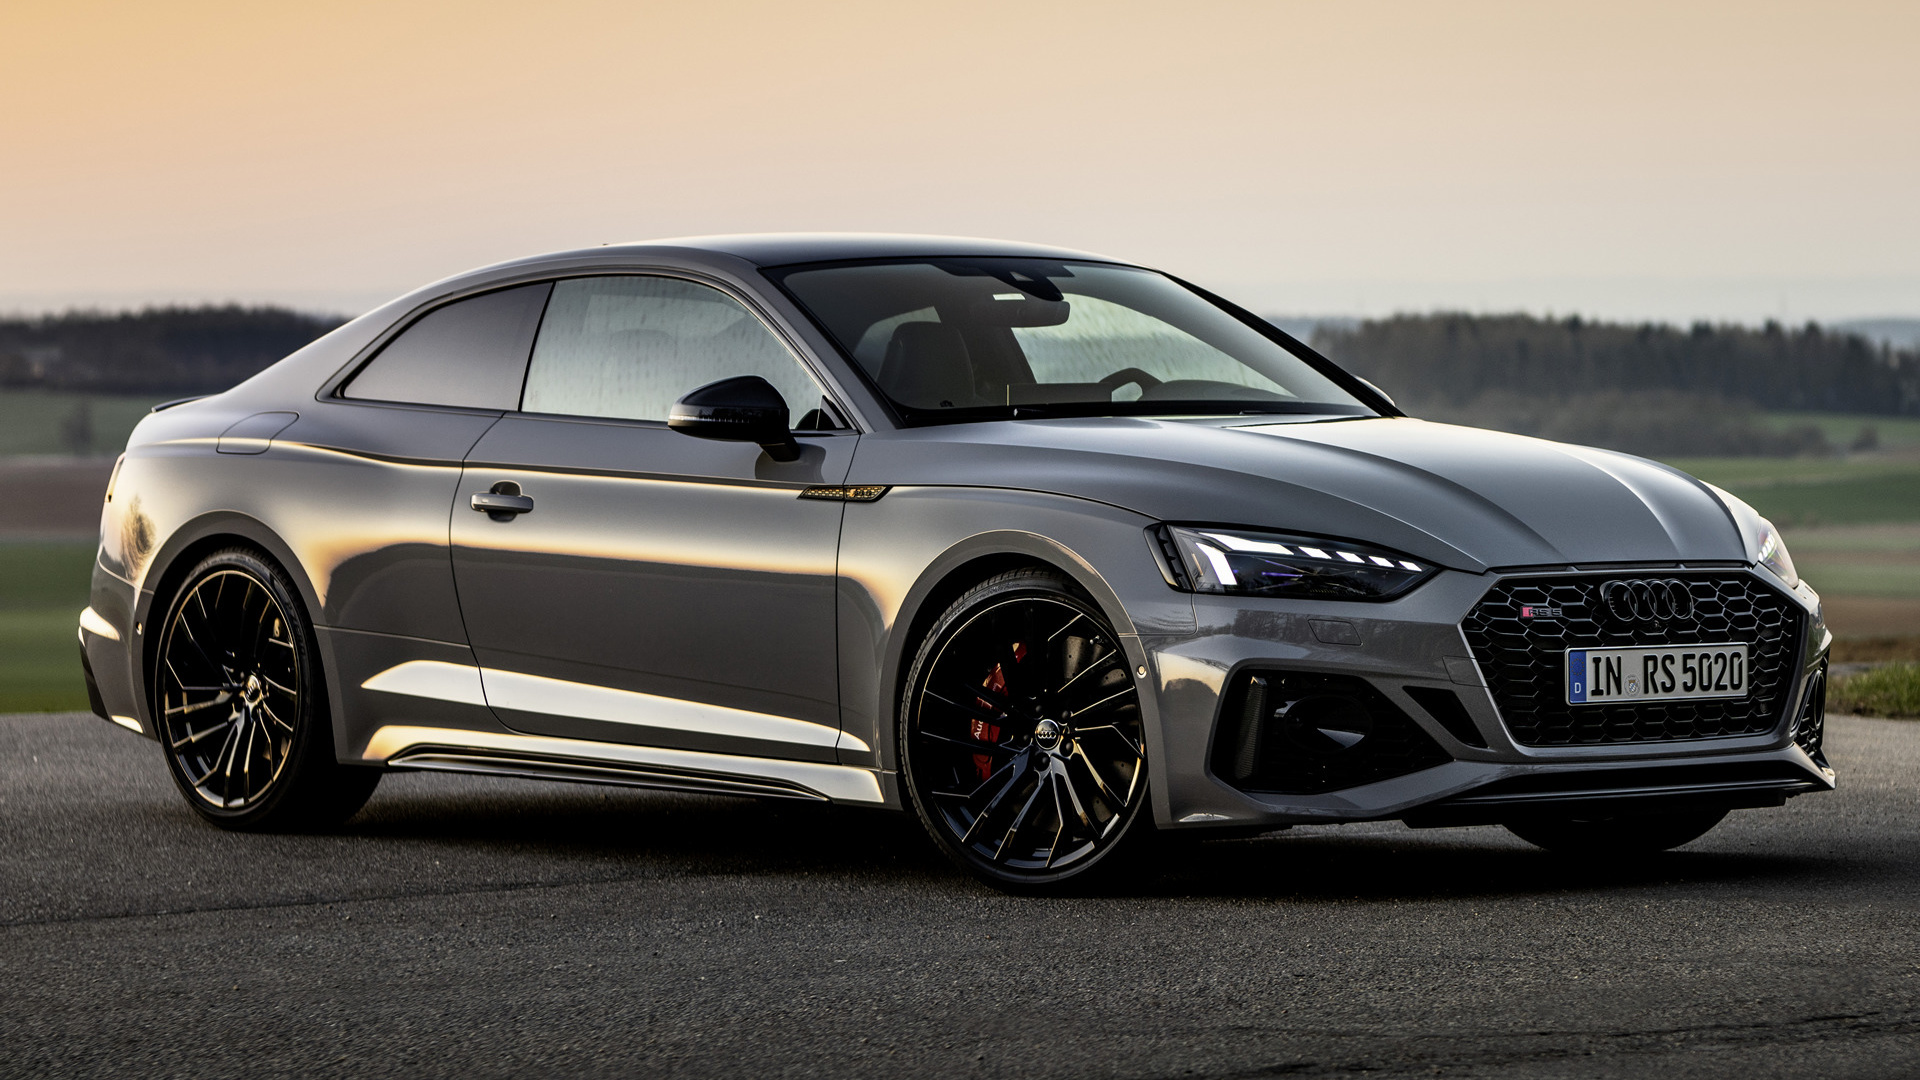 2020 Audi RS5 Coupe Wallpapers | SuperCars.net